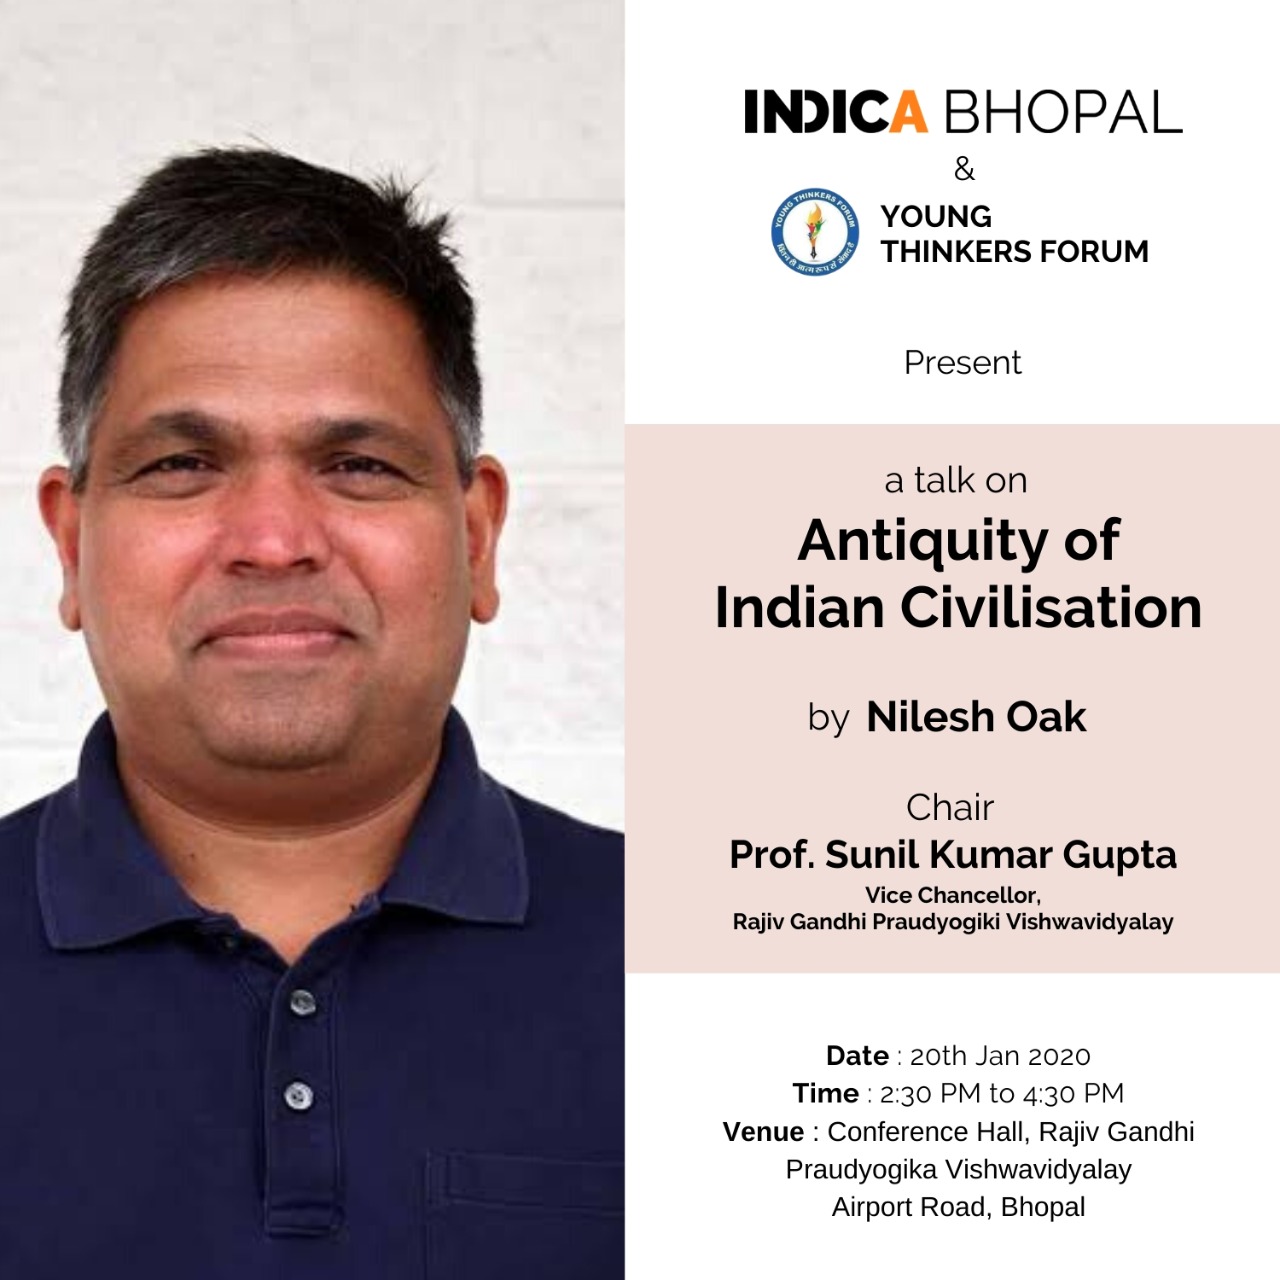 Indica Bhopal: Talk by Nilesh Oak on ‘Antiquity of Indian Civilisation’